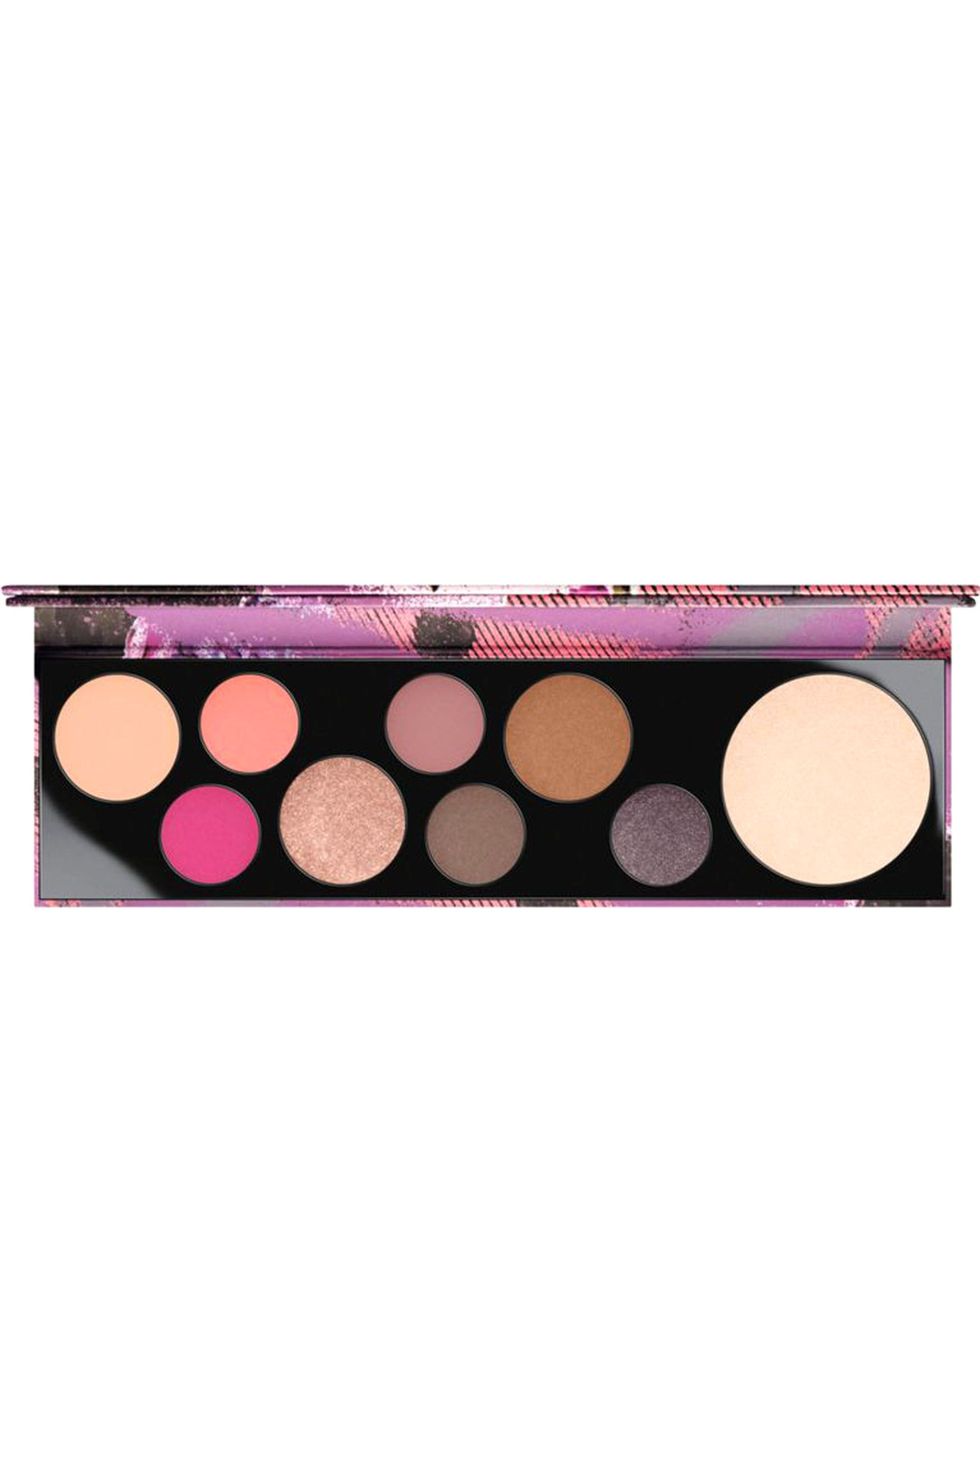 If You Want an Eyeshadow Palette With Pops of Color